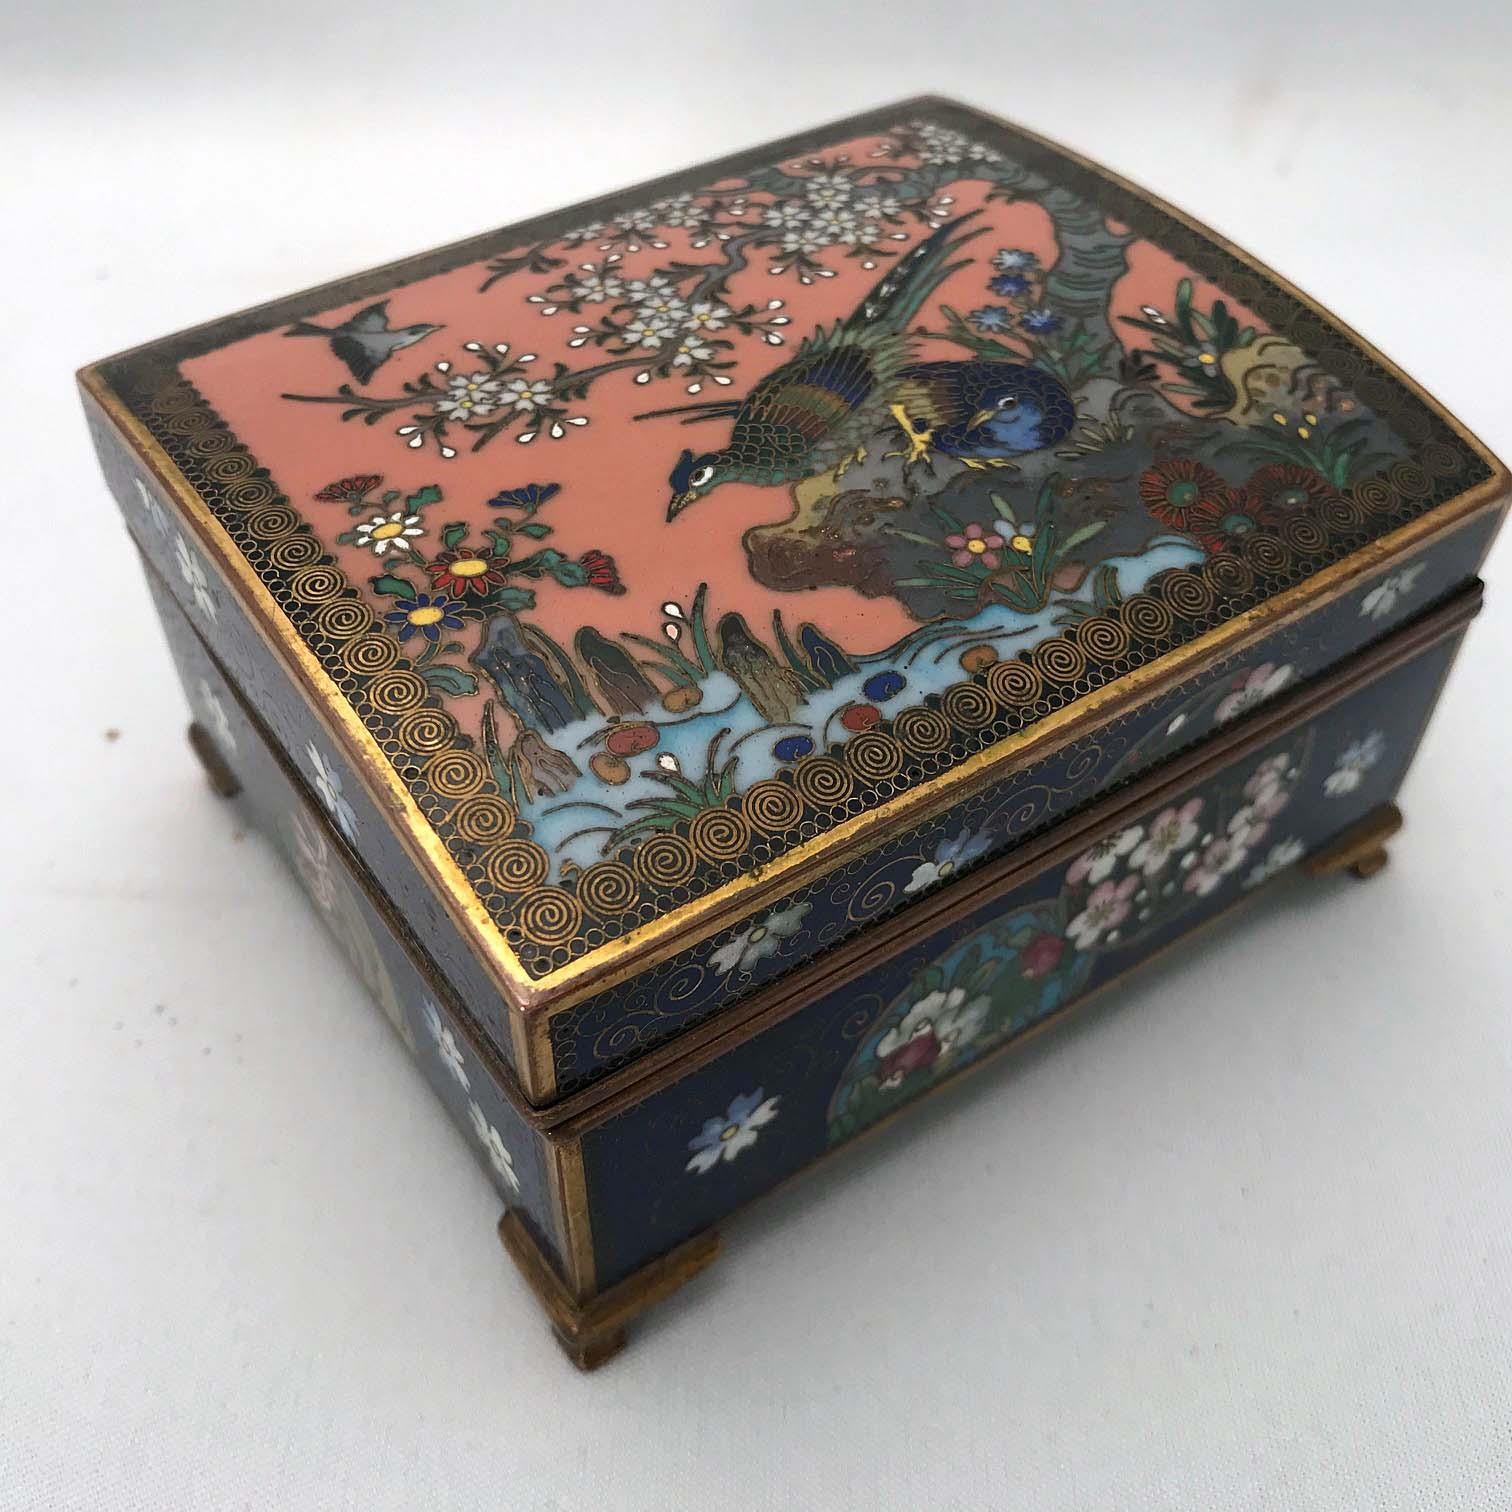 This box shows well the quality of early 20th century Japanese workmanship. The cover is finely worked with birds in a flowering and blossoming landscape. The birds are pheasants, the blossoms perhaps stylized prunus. The sides repeat the motif. The